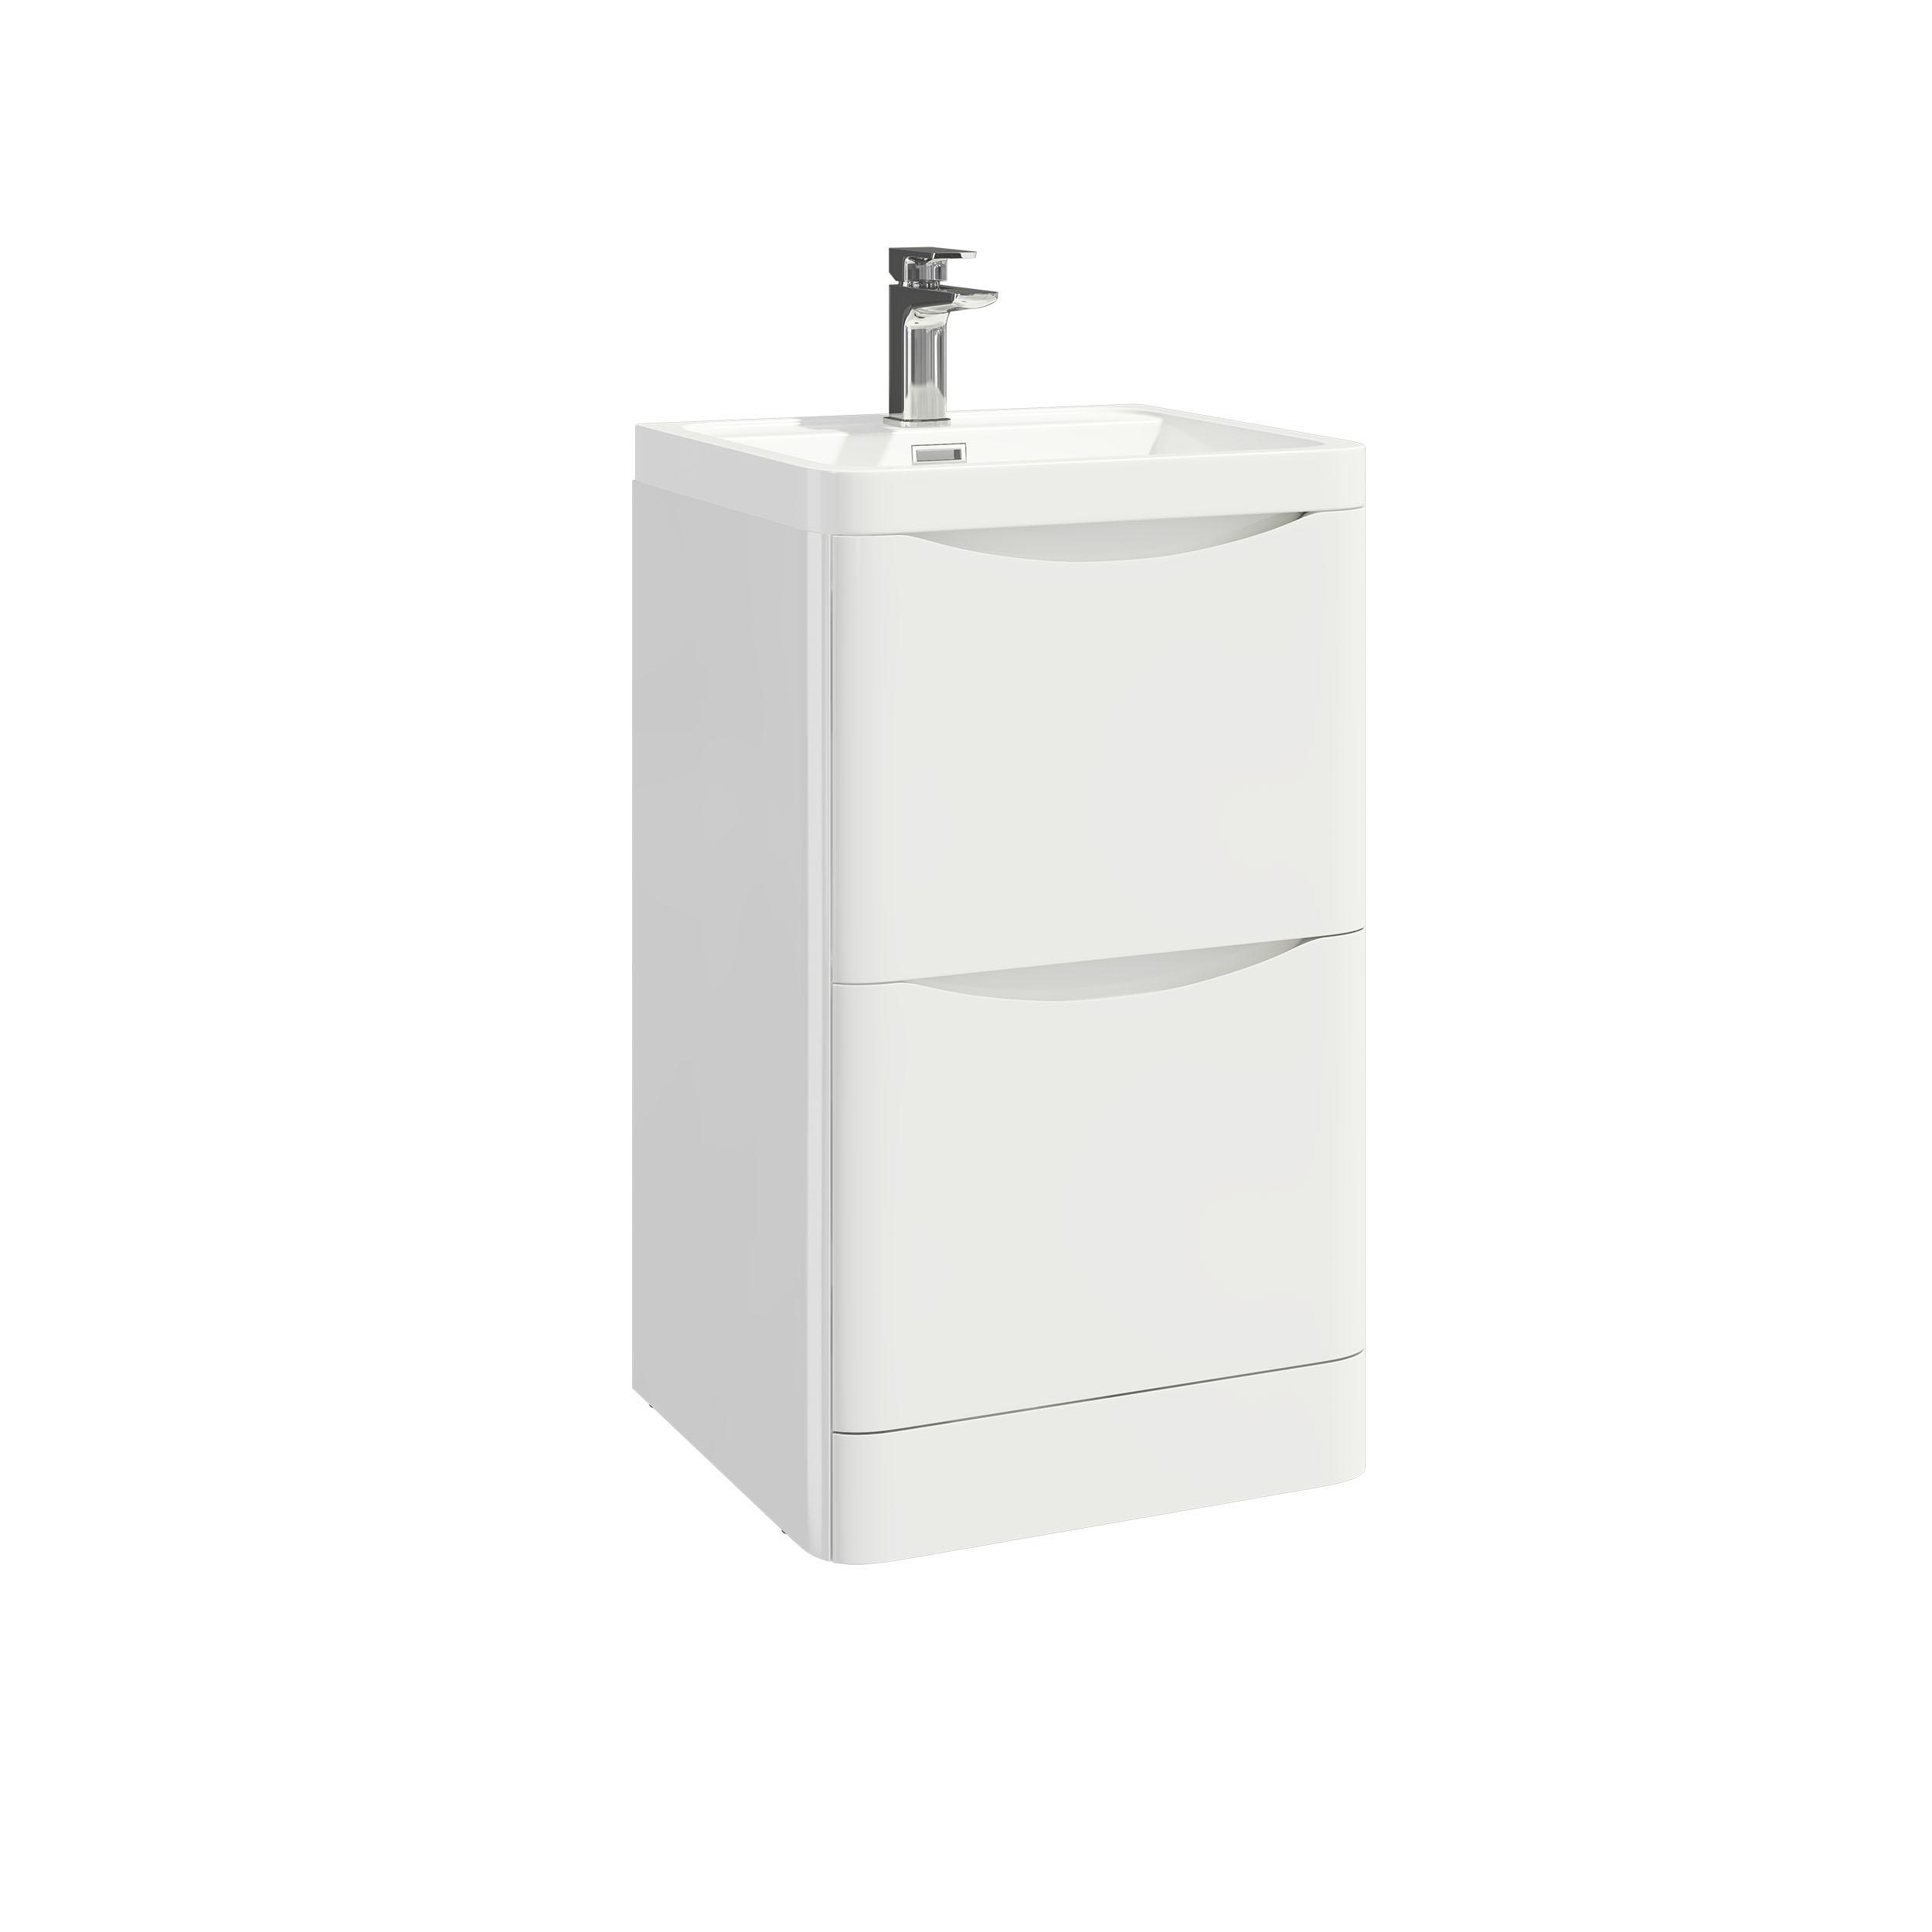 Casa Bano Contour 500 Floor Cabinet With Basin or Counter Top - High Gloss White